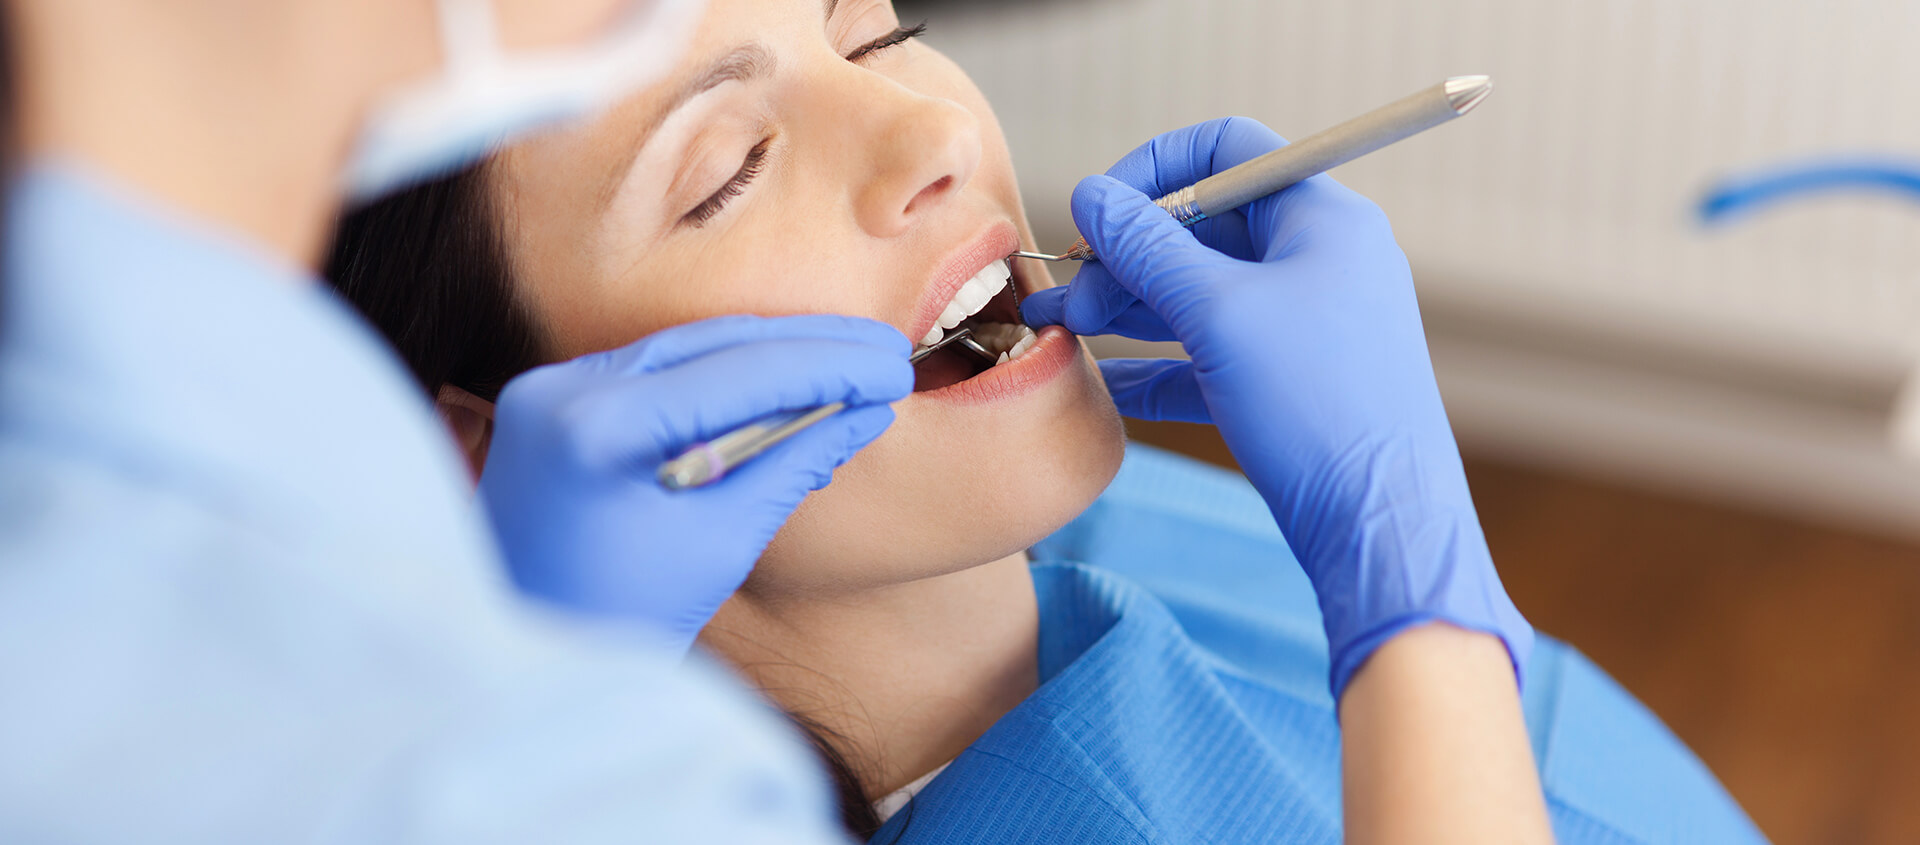 Tooth Filling Procedure at Acadia Family Dentistry in Thibodaux Area